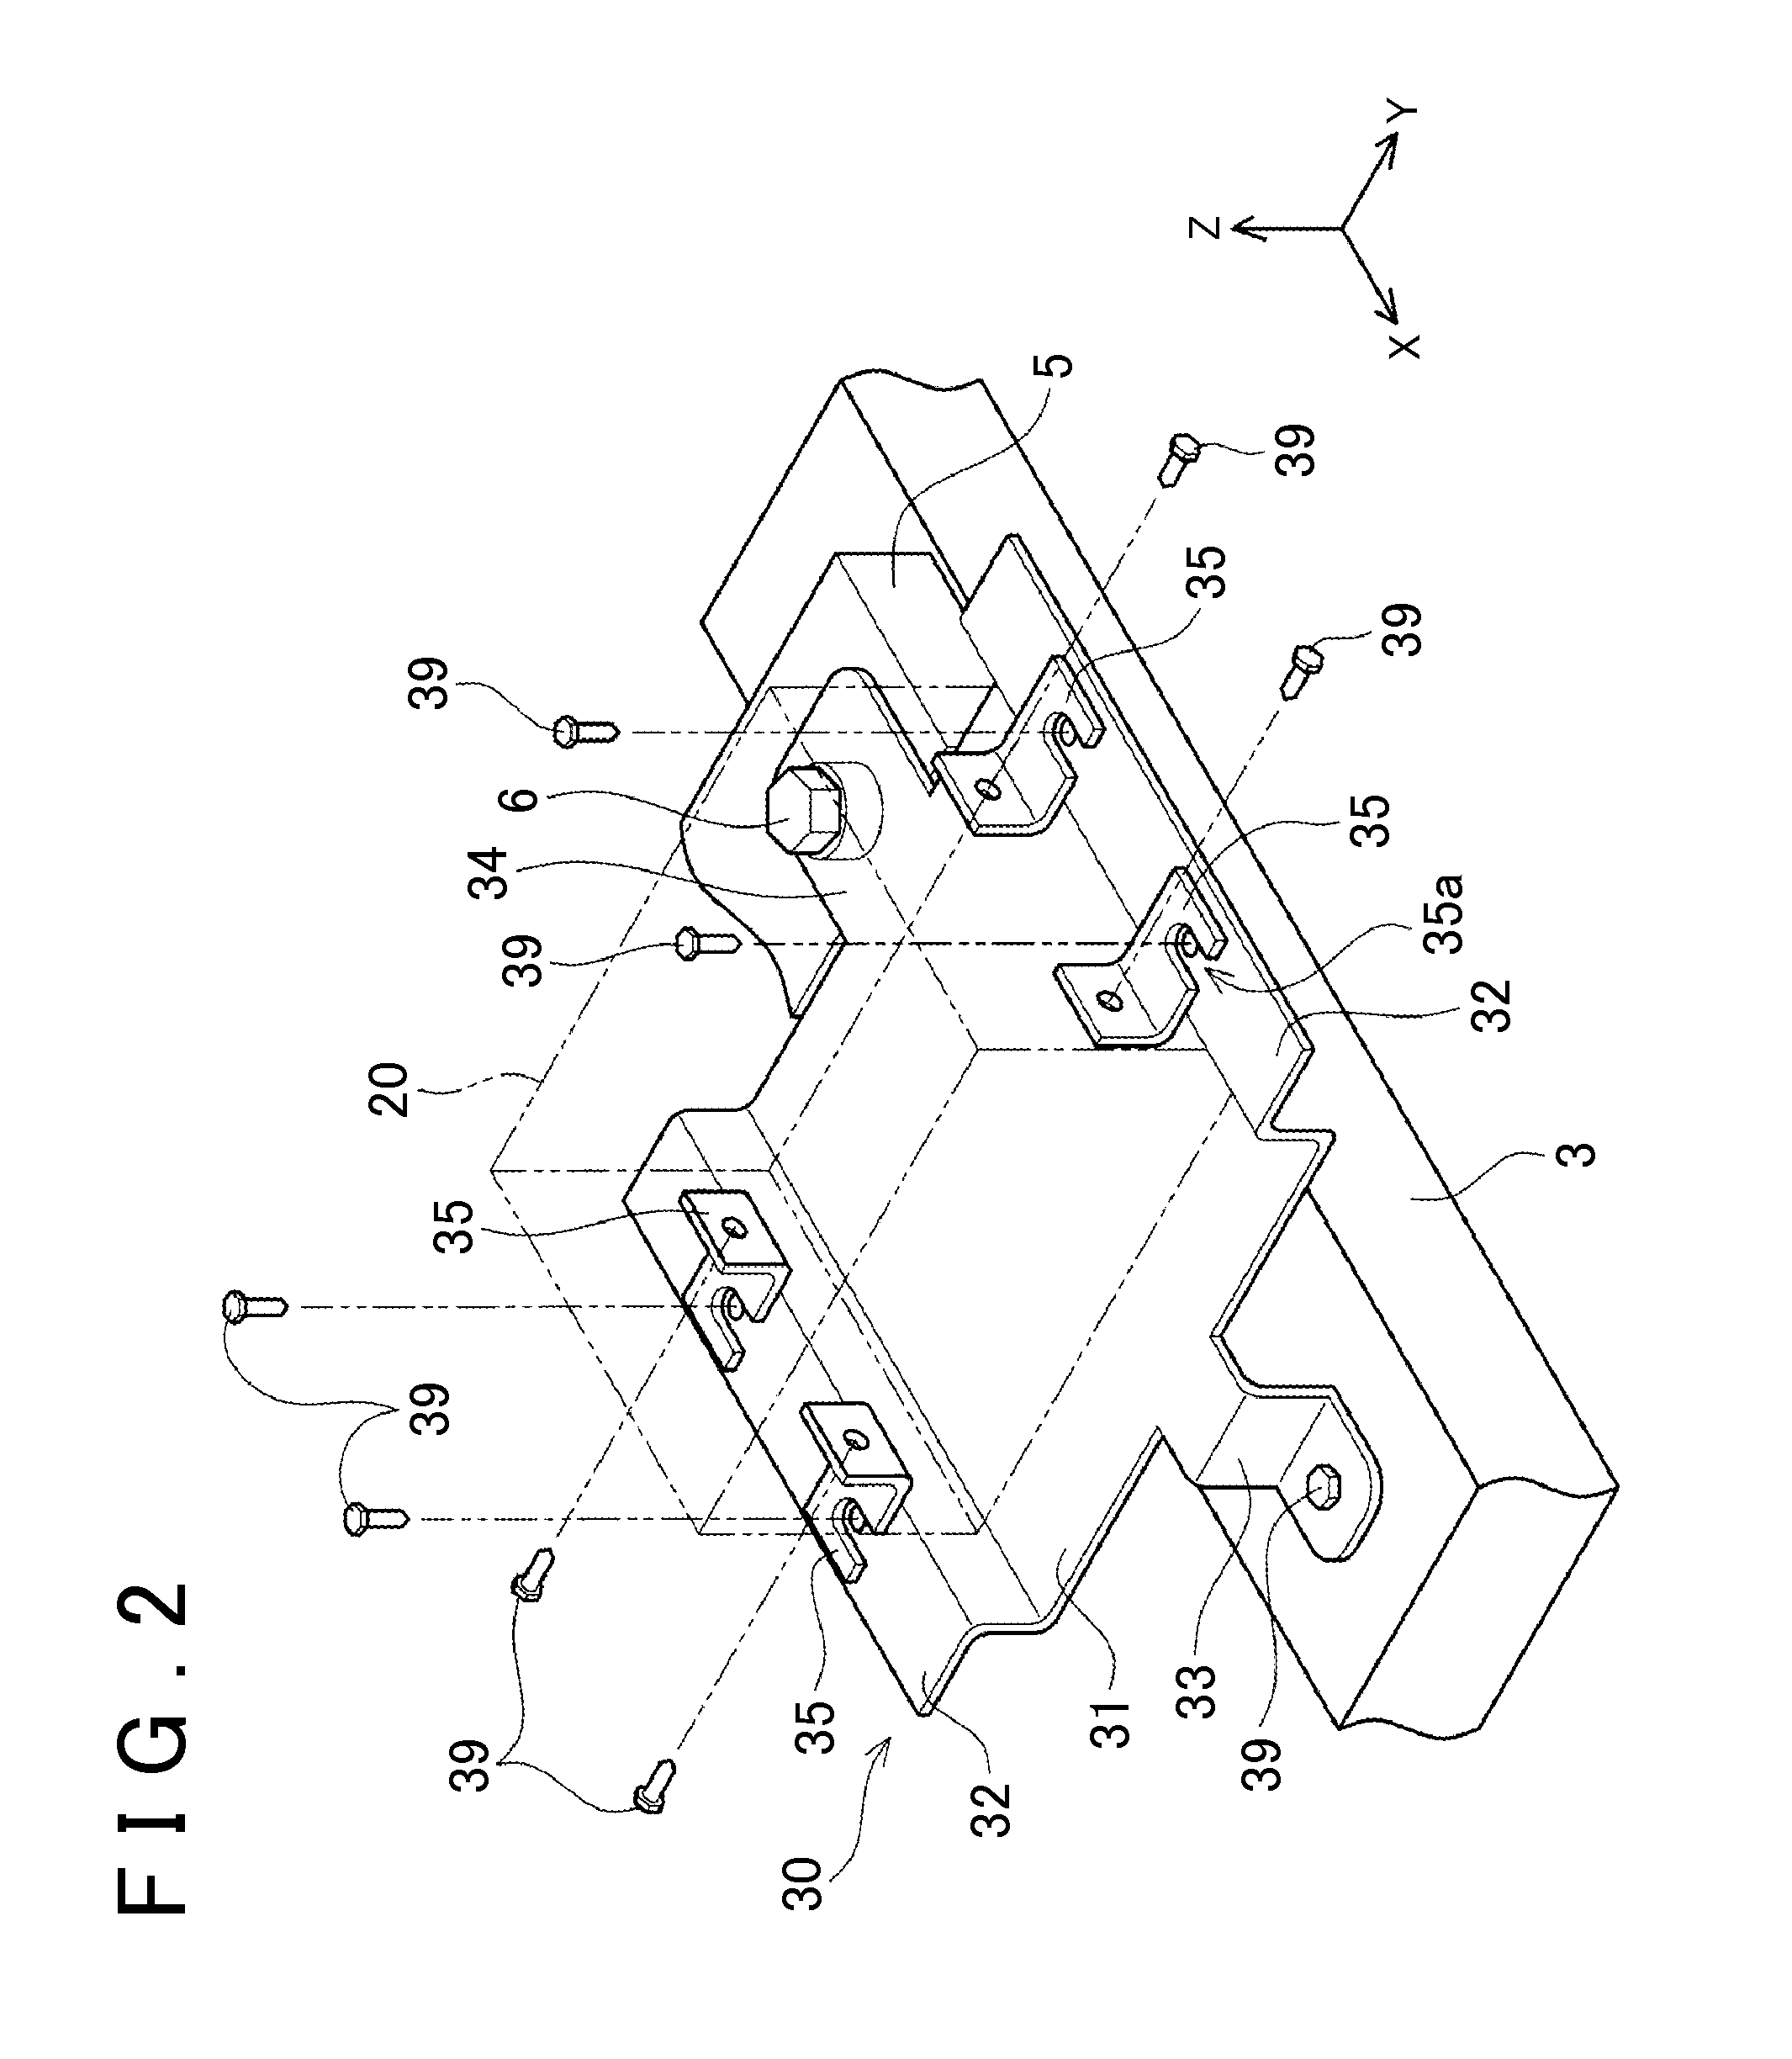 Fixing structure of electric apparatus to vehicle